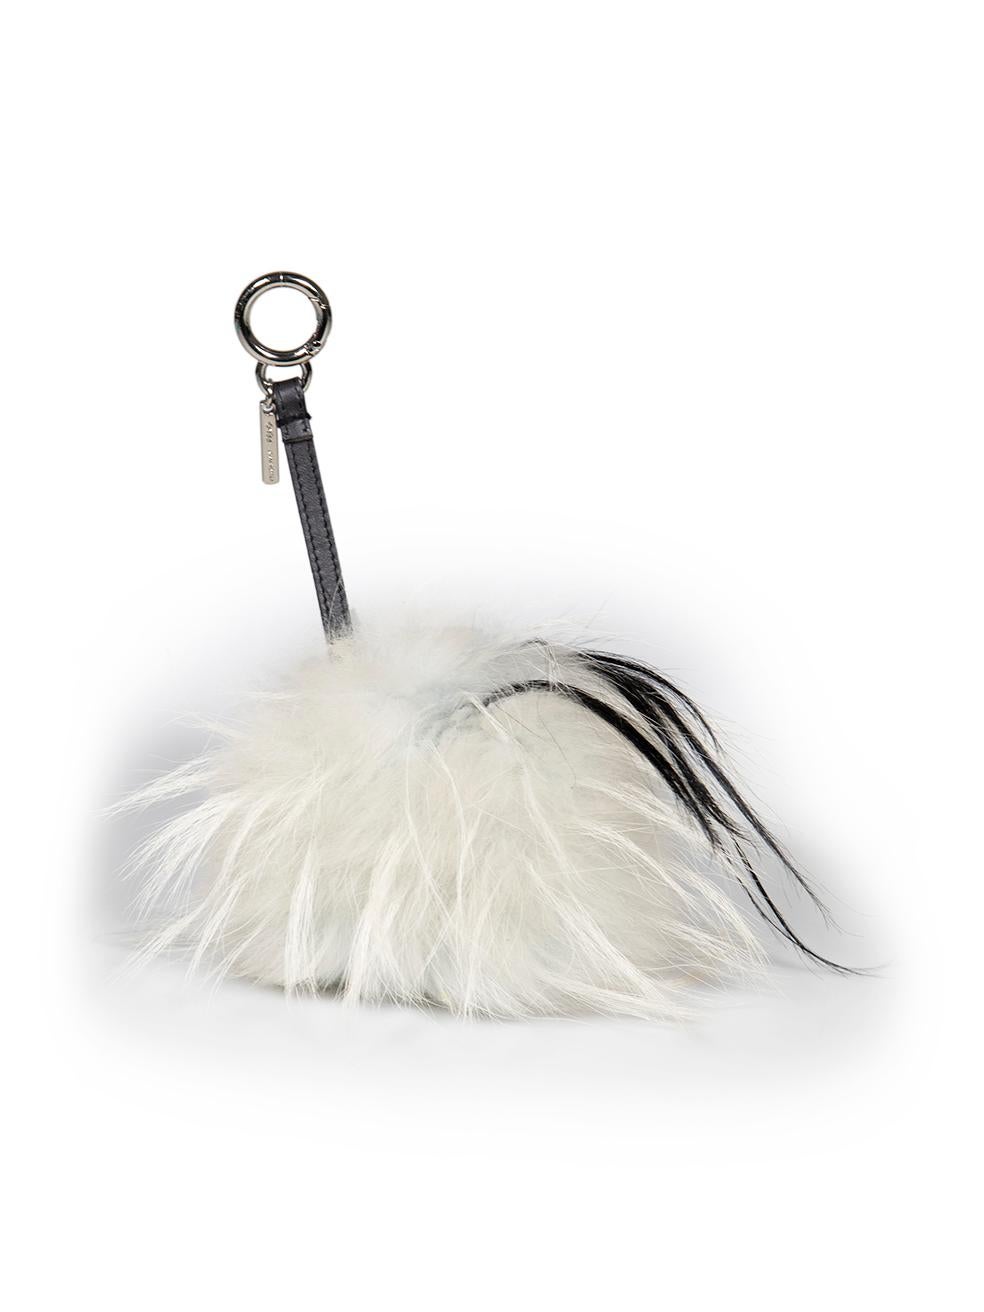 Fendi Light Blue Fur Maddie Monster Bag Charm In New Condition For Sale In London, GB